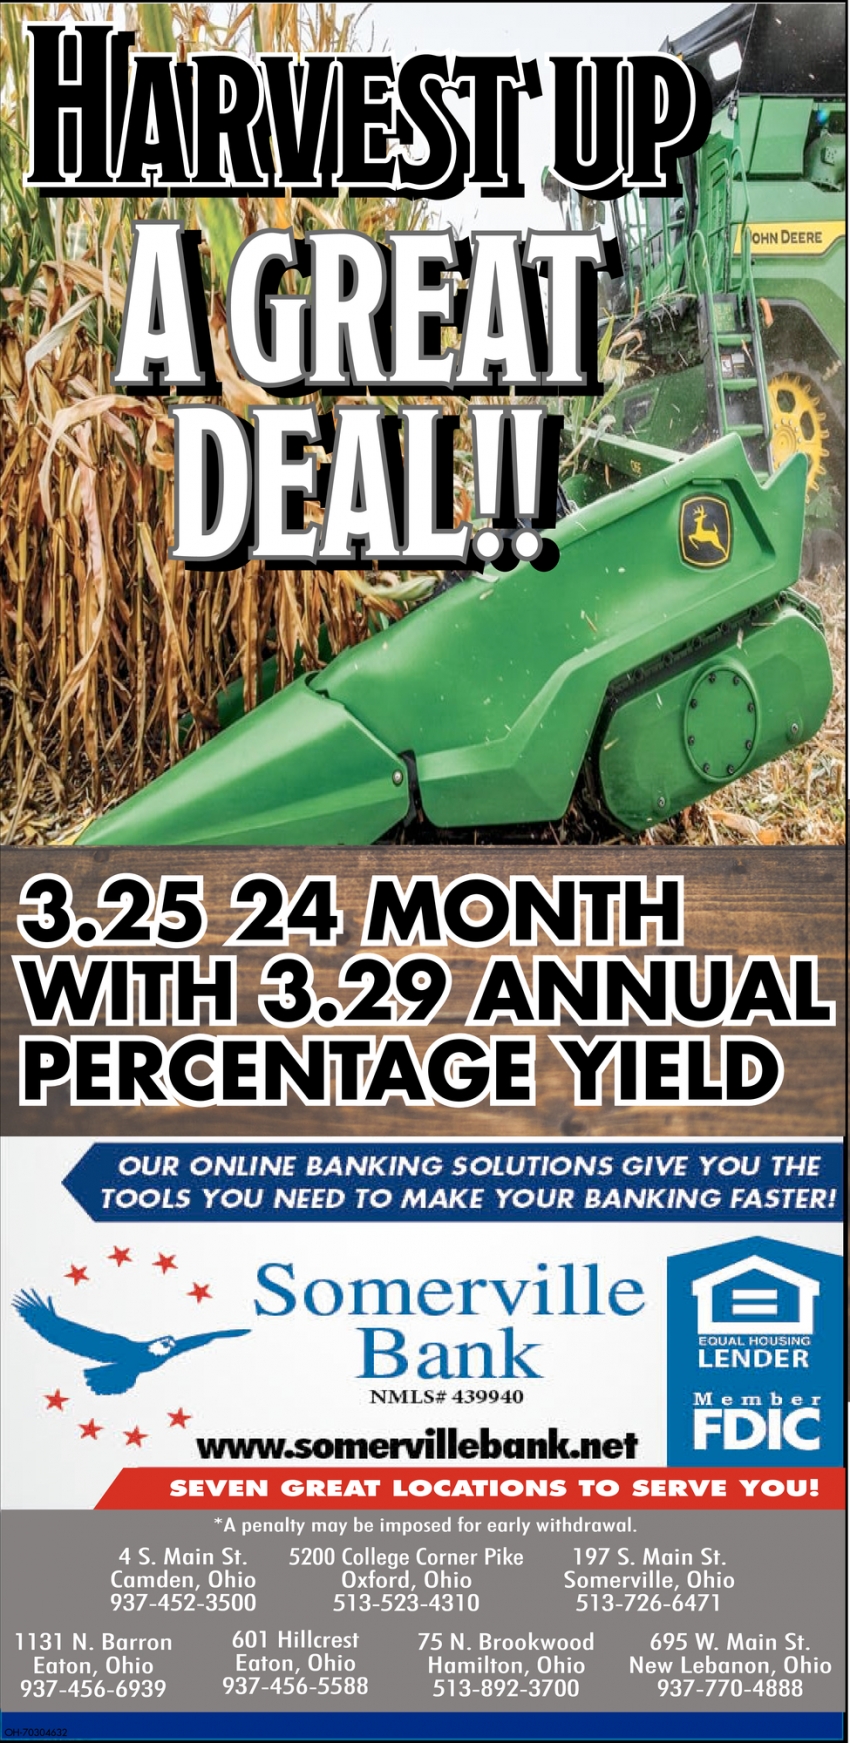 Harvest Up A Great Deal!